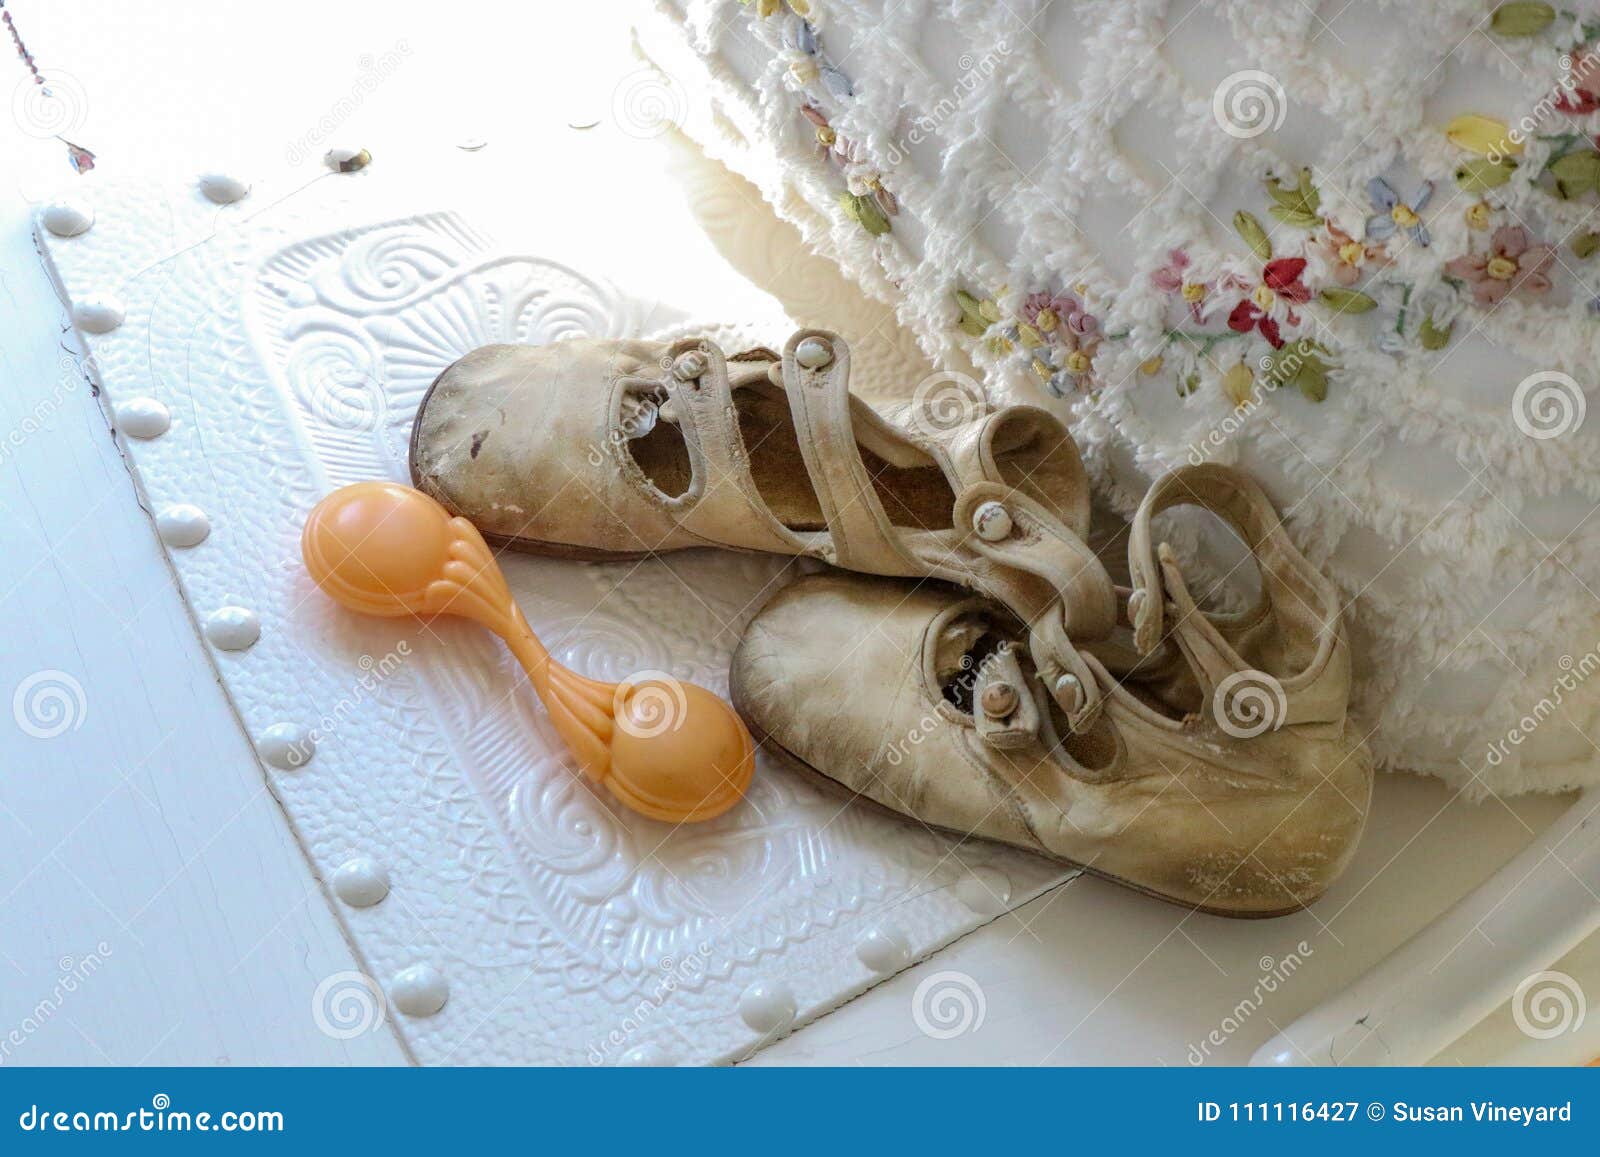 antique baby shoes